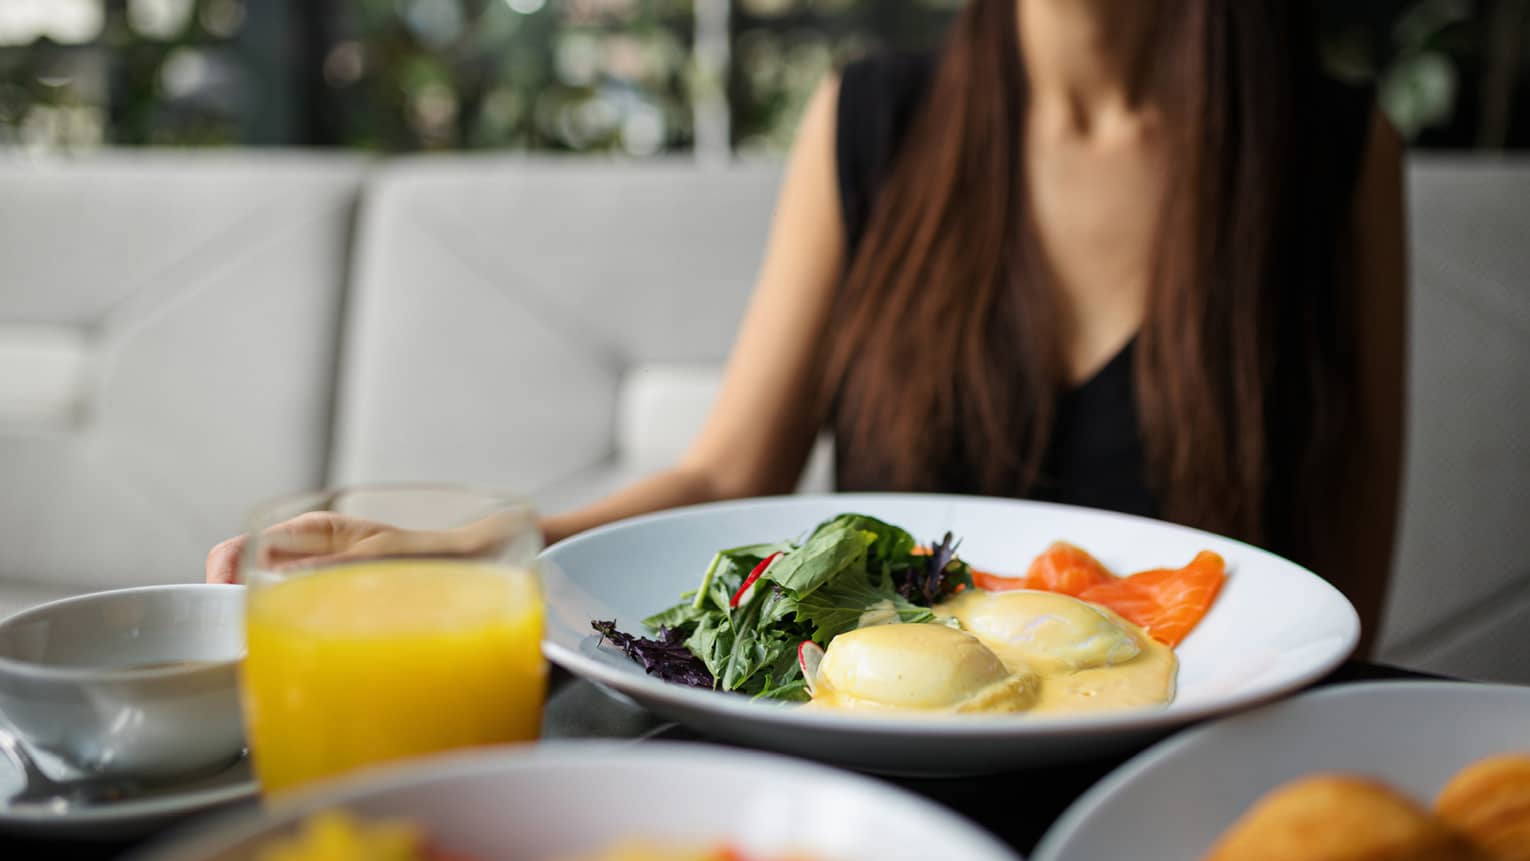 A plate of eggs benedict and a glass of orange juice sit on a table in front of a woman